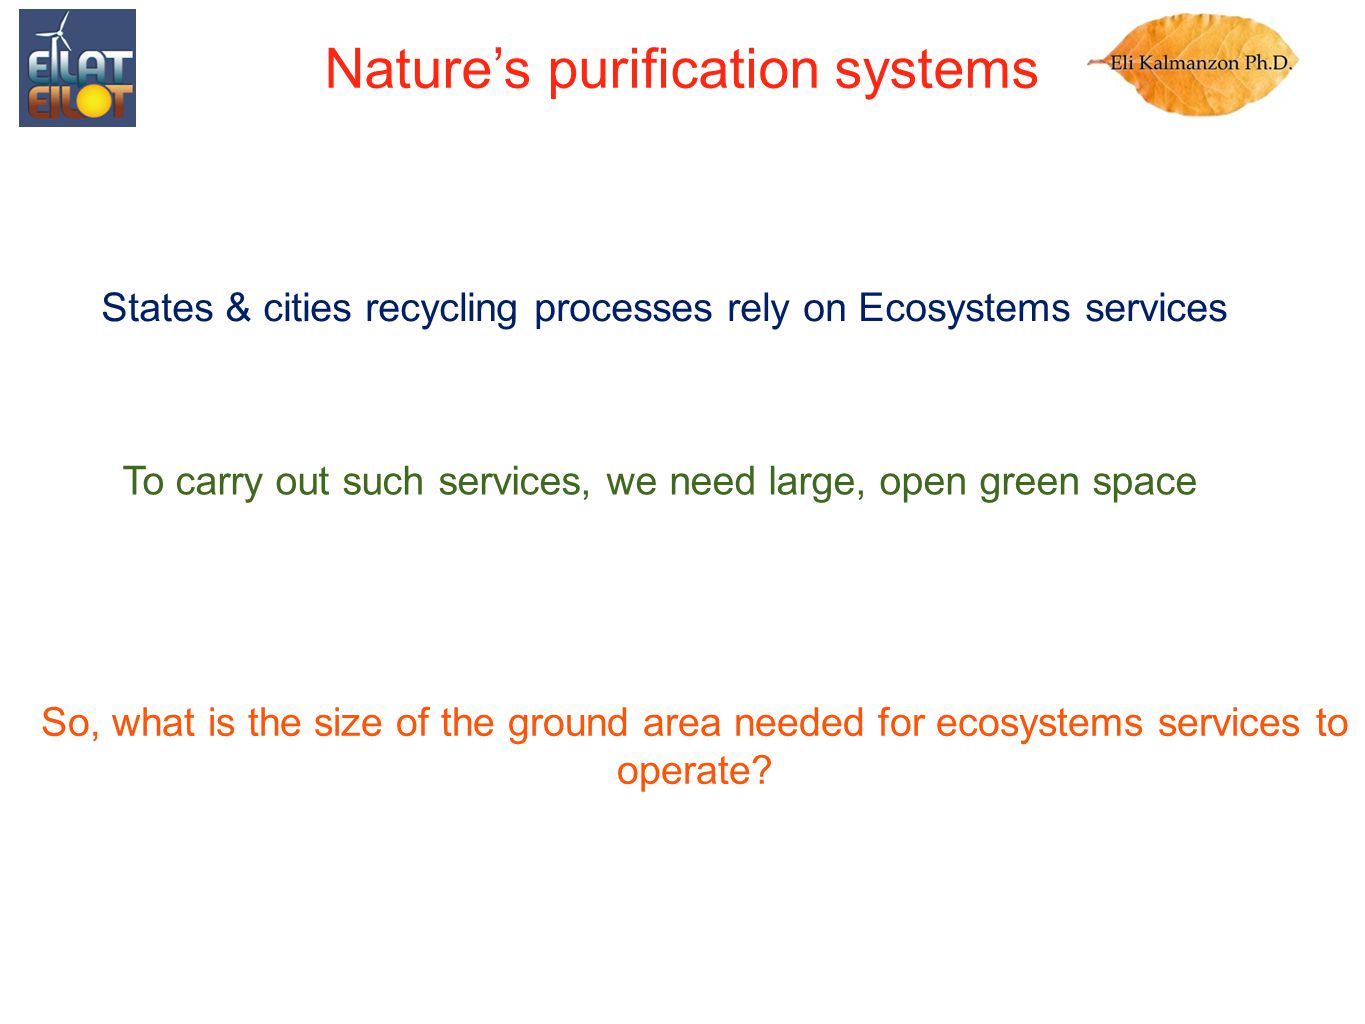 Nature’s purification systems States & cities recycling processes rely on Ecosystems services To carry out such services, we need large, open green space So, what is the size of the ground area needed for ecosystems services to operate